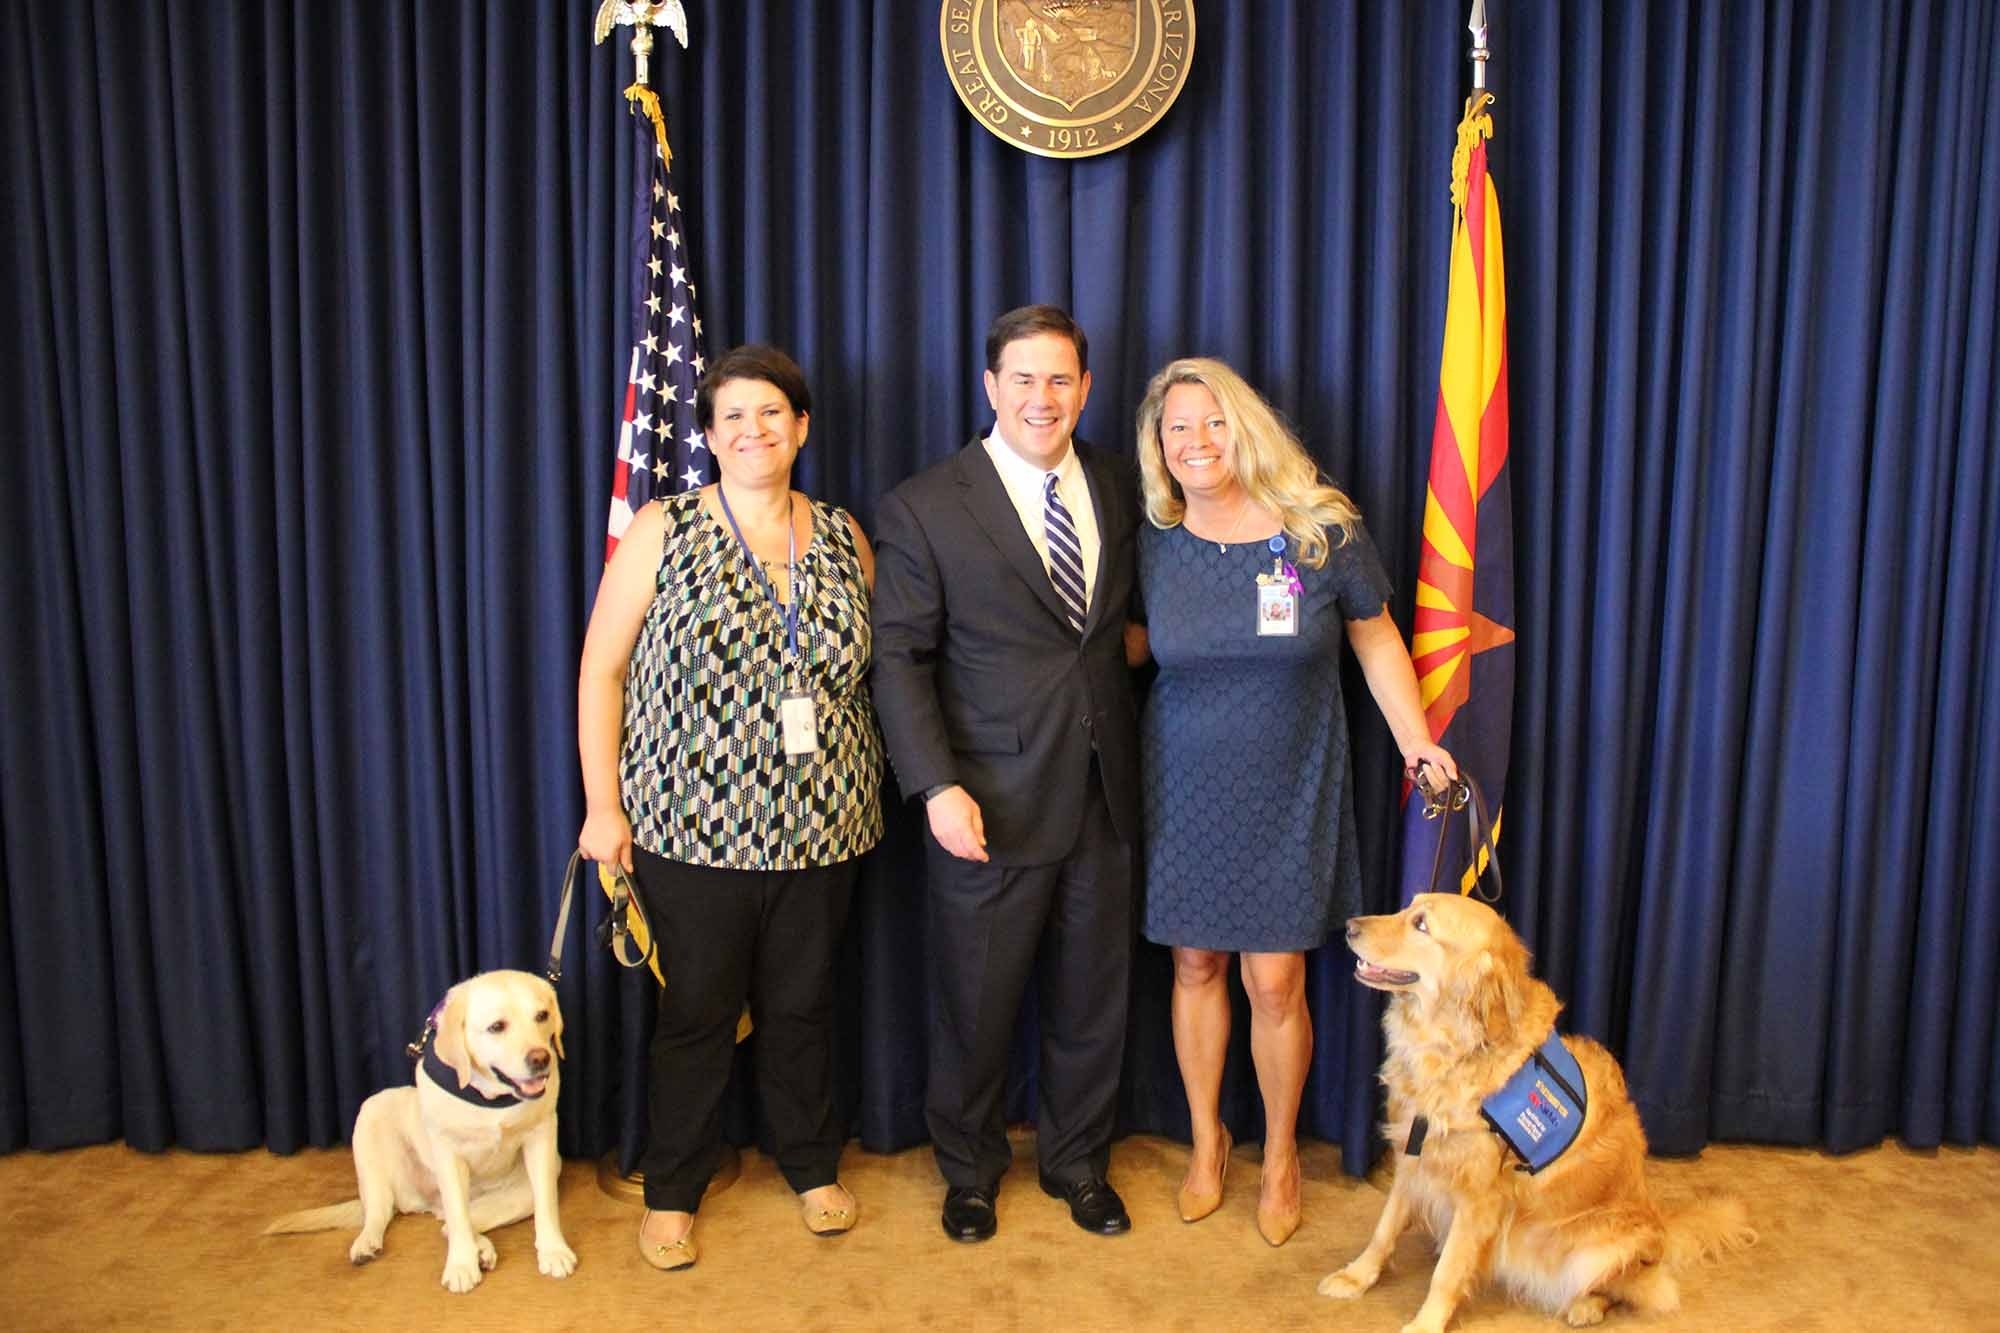 GOVERNOR DOUG DUCEY HOLDS SIGNING CEREMONY FOR BILL PROTECTING CHILD VICTIMS